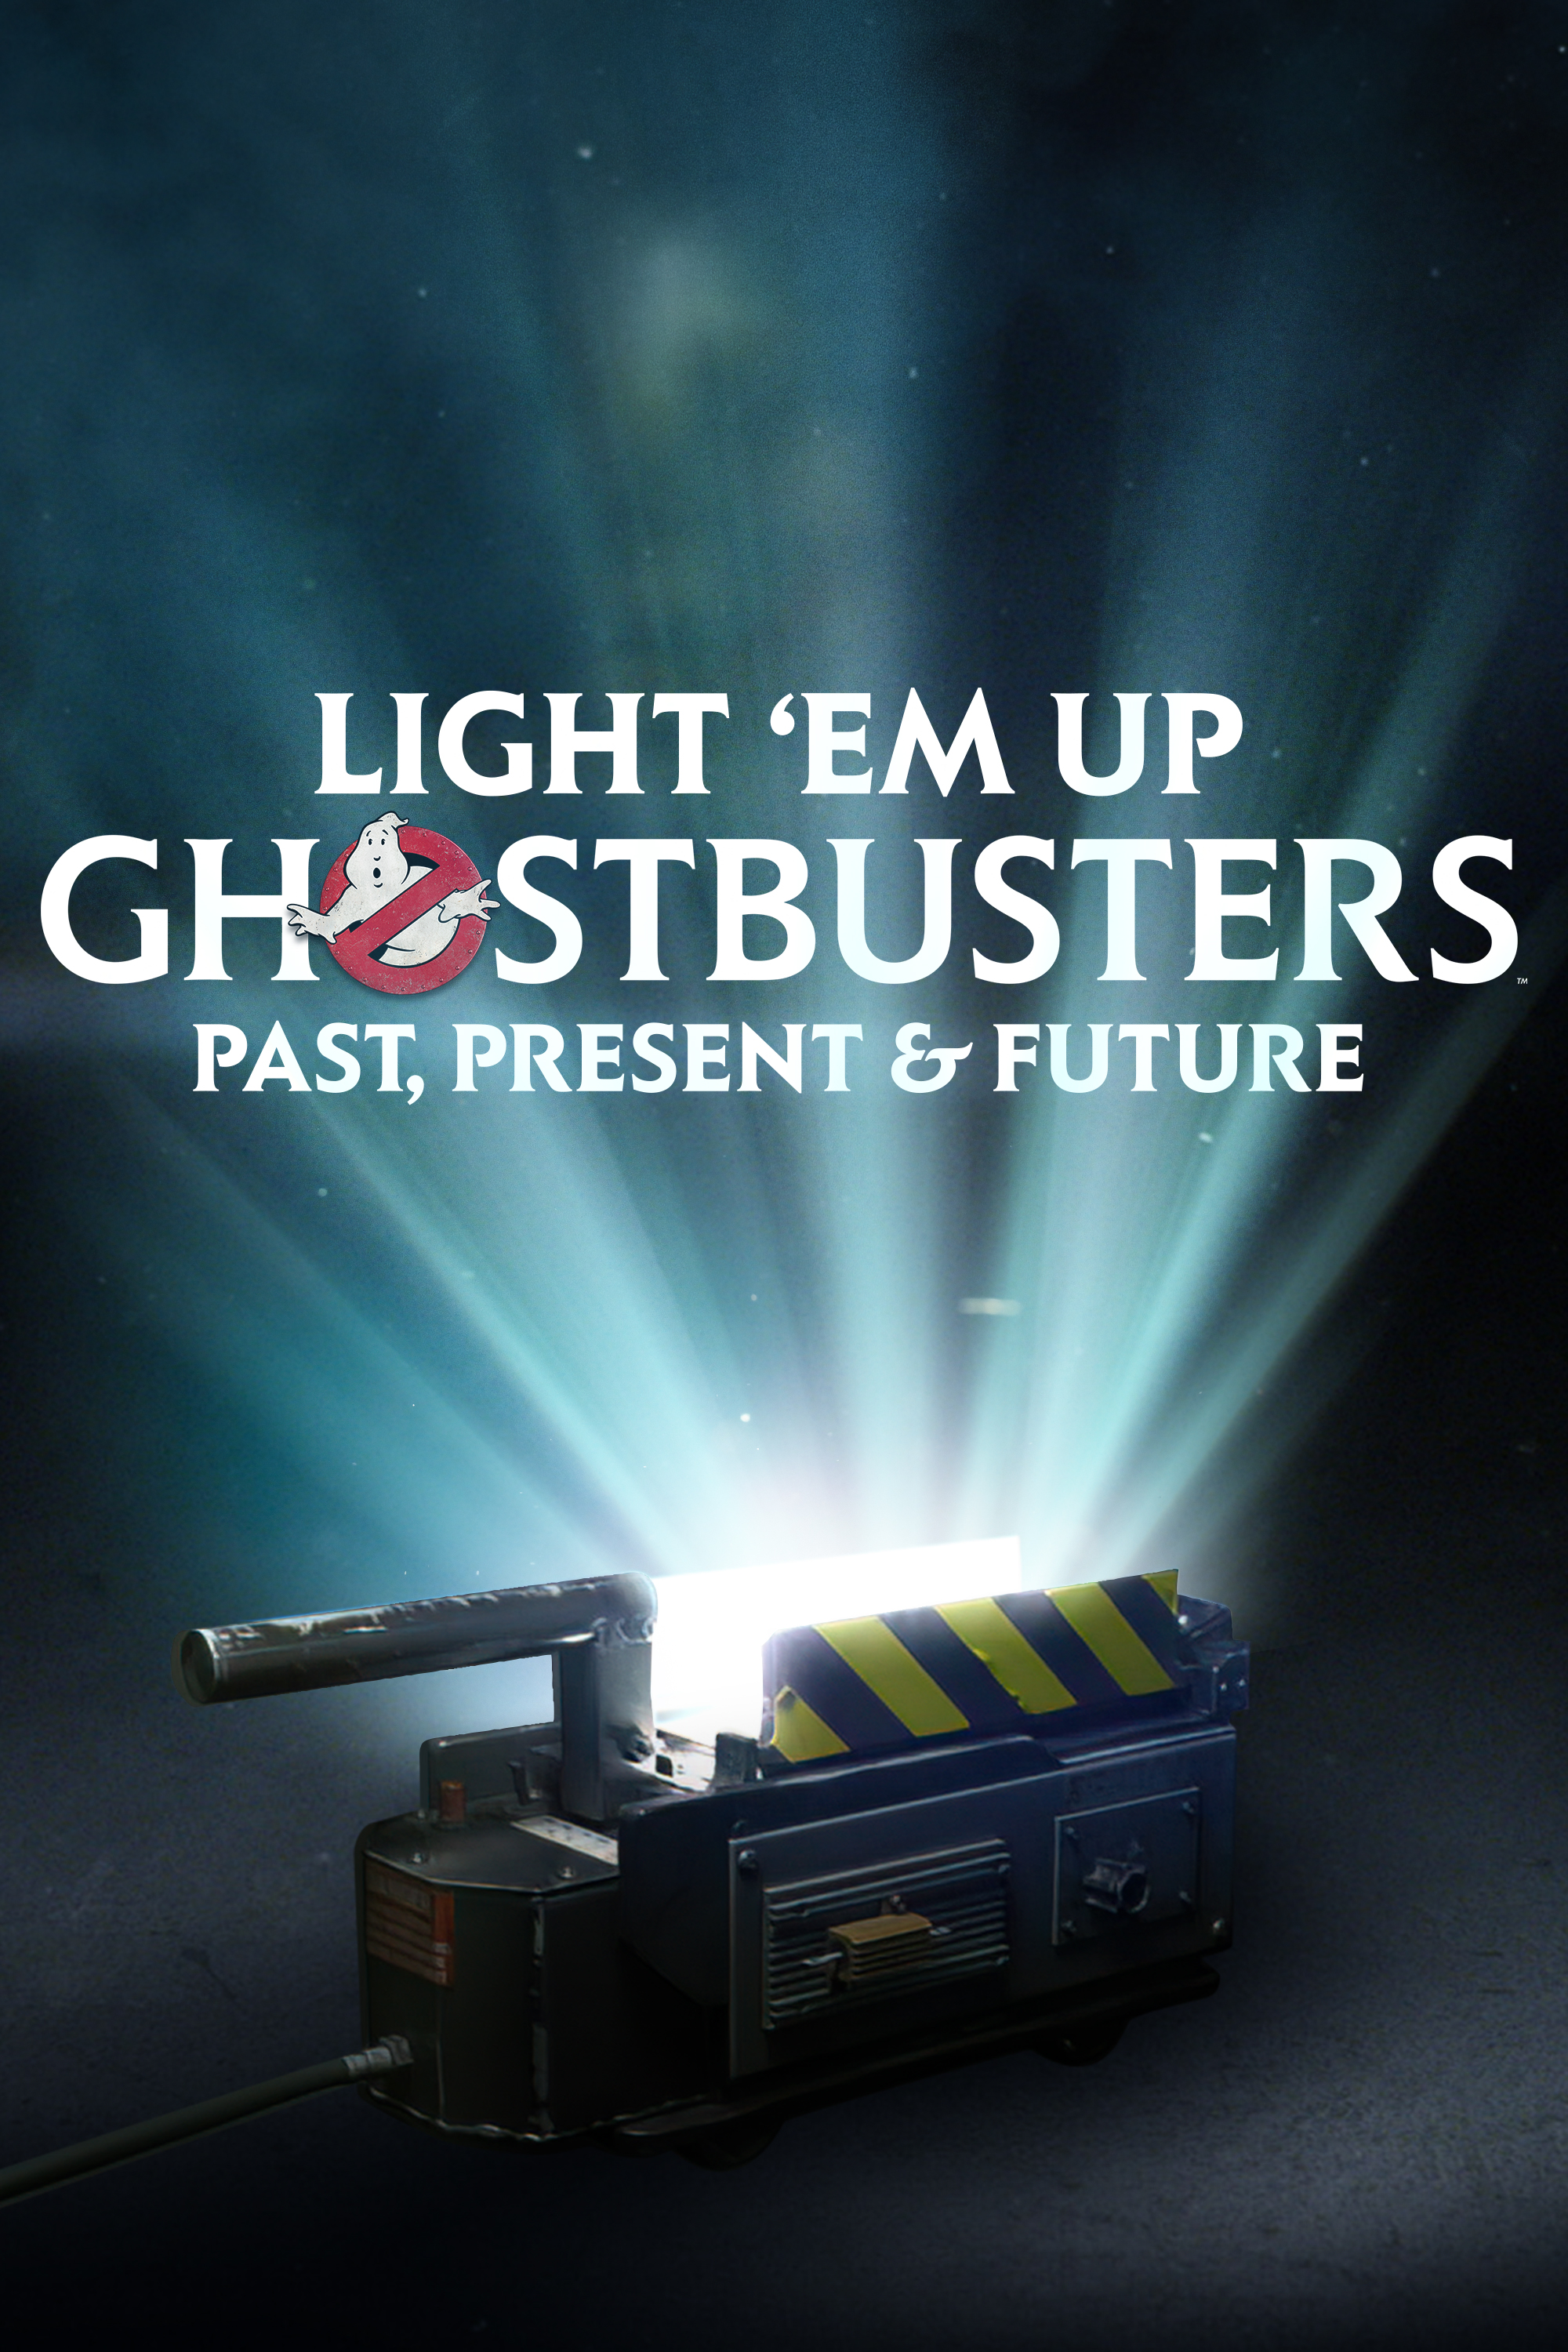 Light ‘Em Up: Ghostbusters Past, Present & Future (22 minutes) is free to own on Microsoft Store